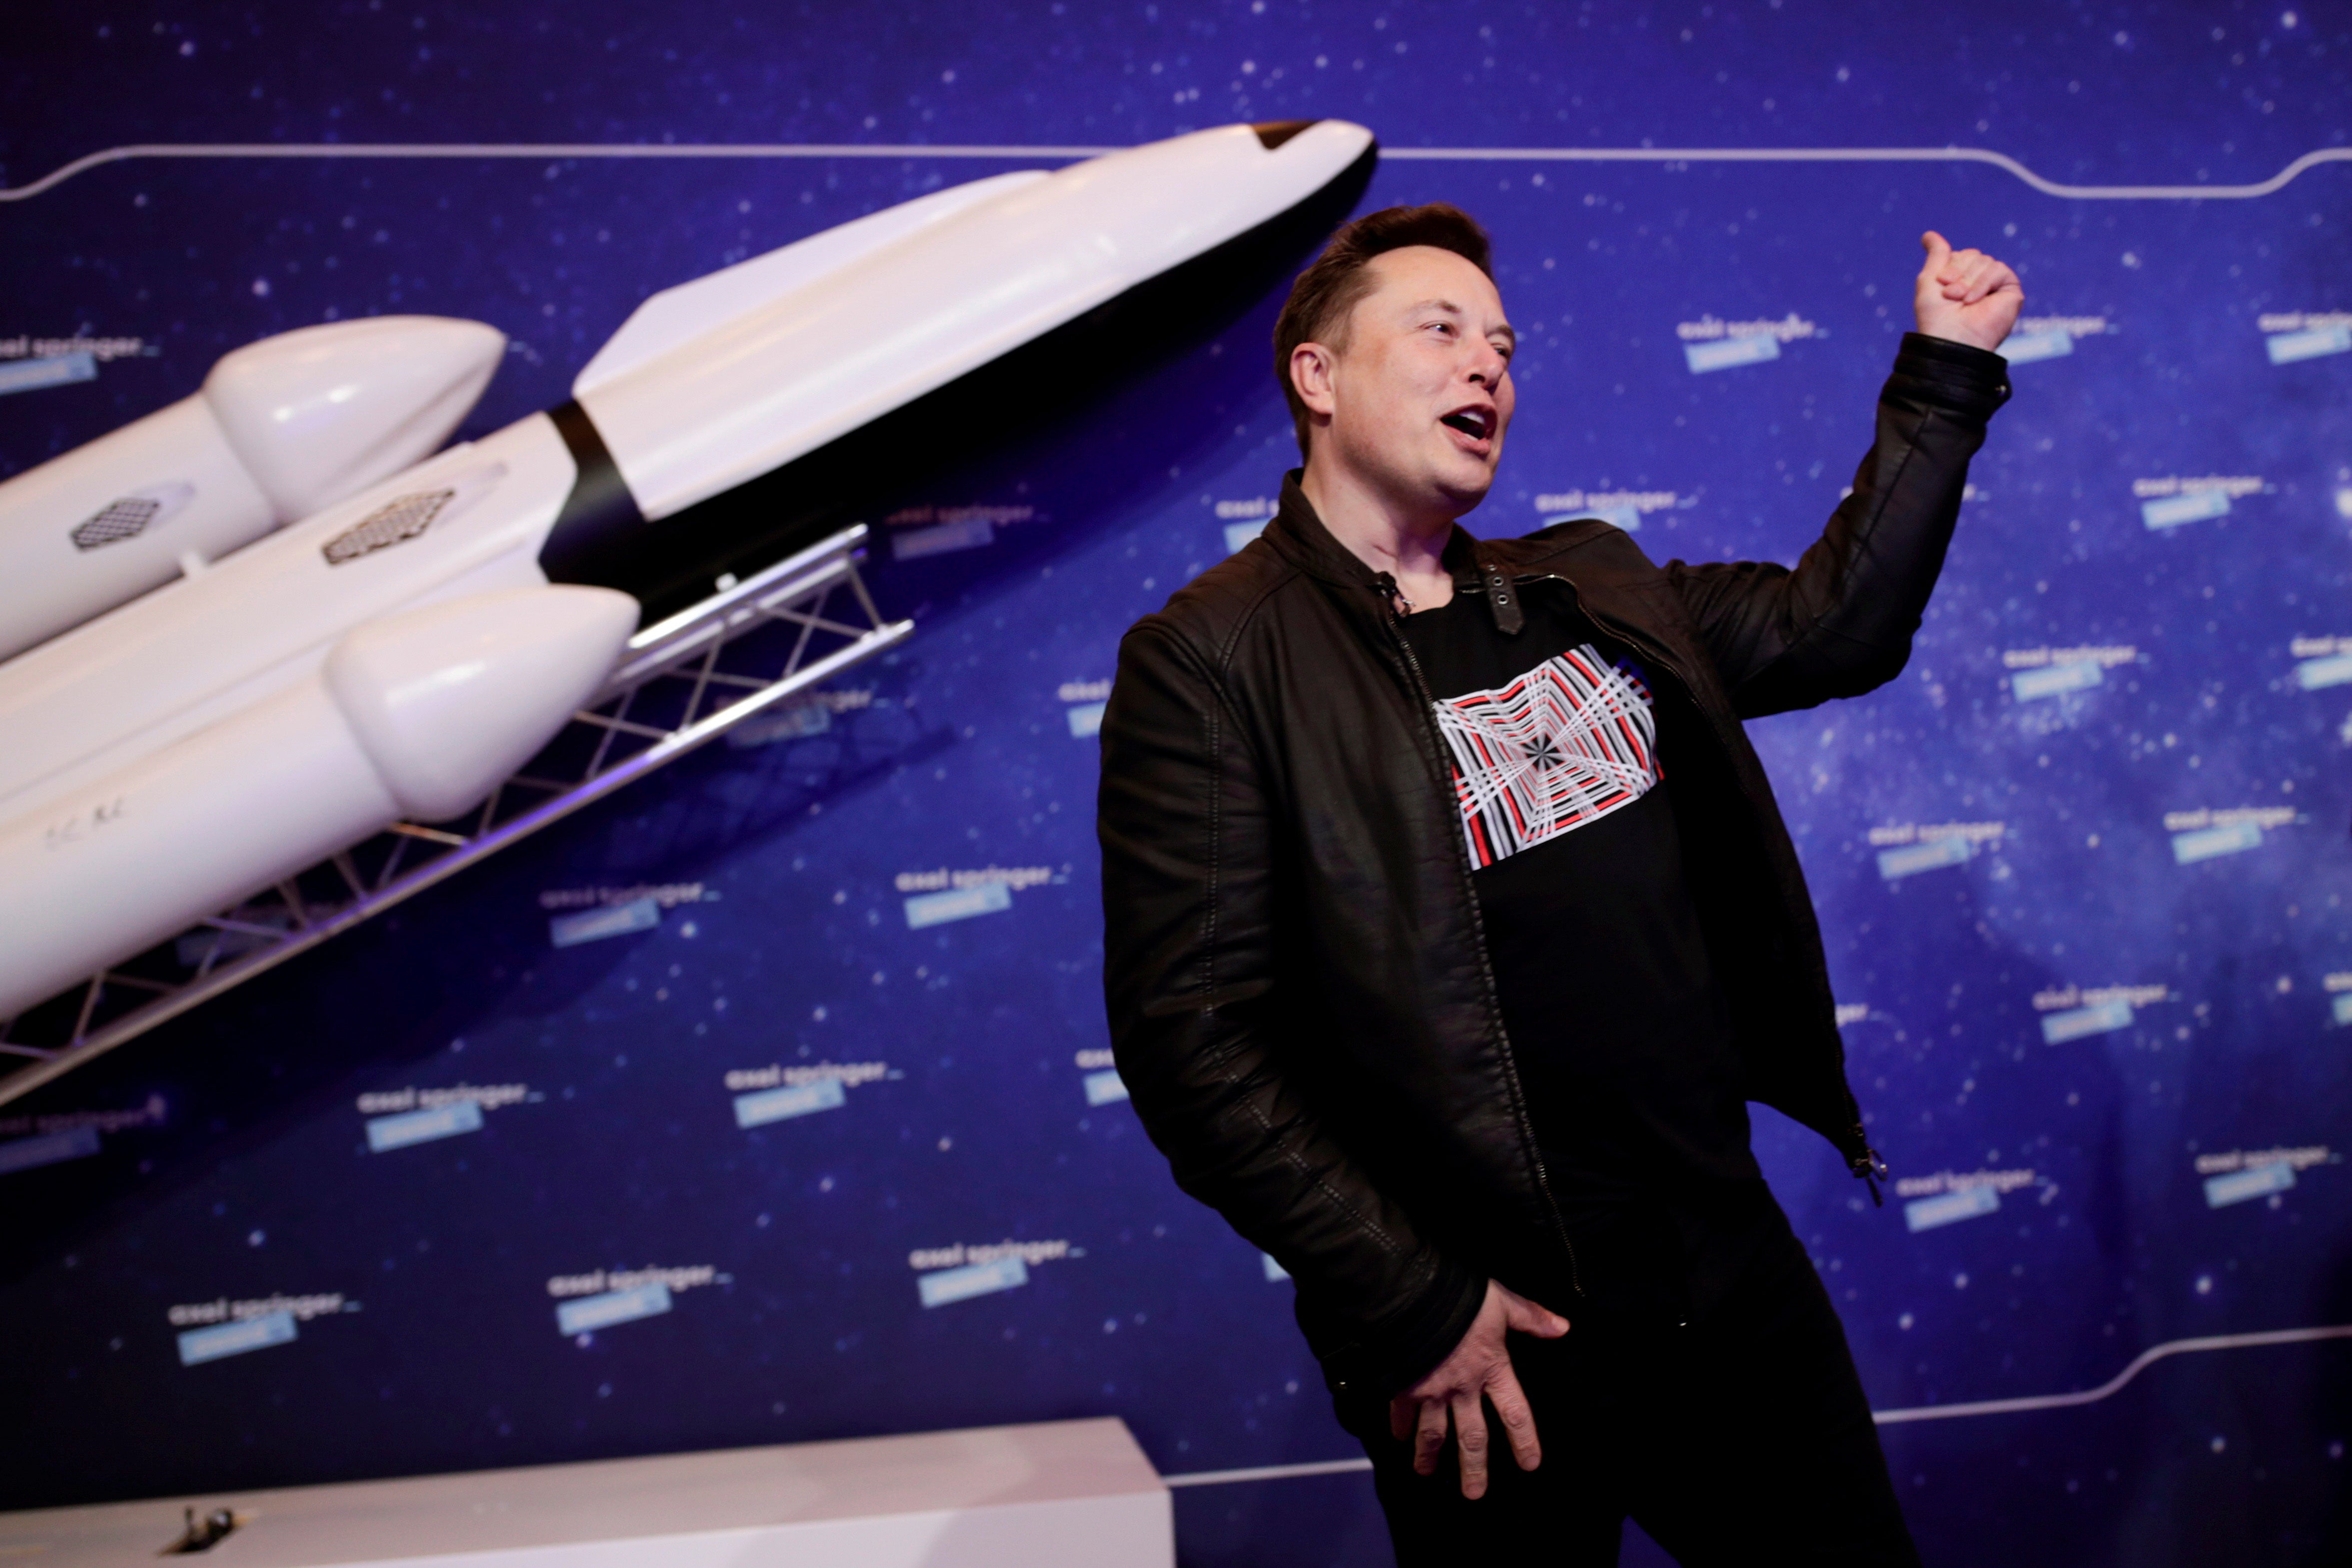 Musk at an event in 2020. (Photo: Hannibal Hanschke/Pool, AP)